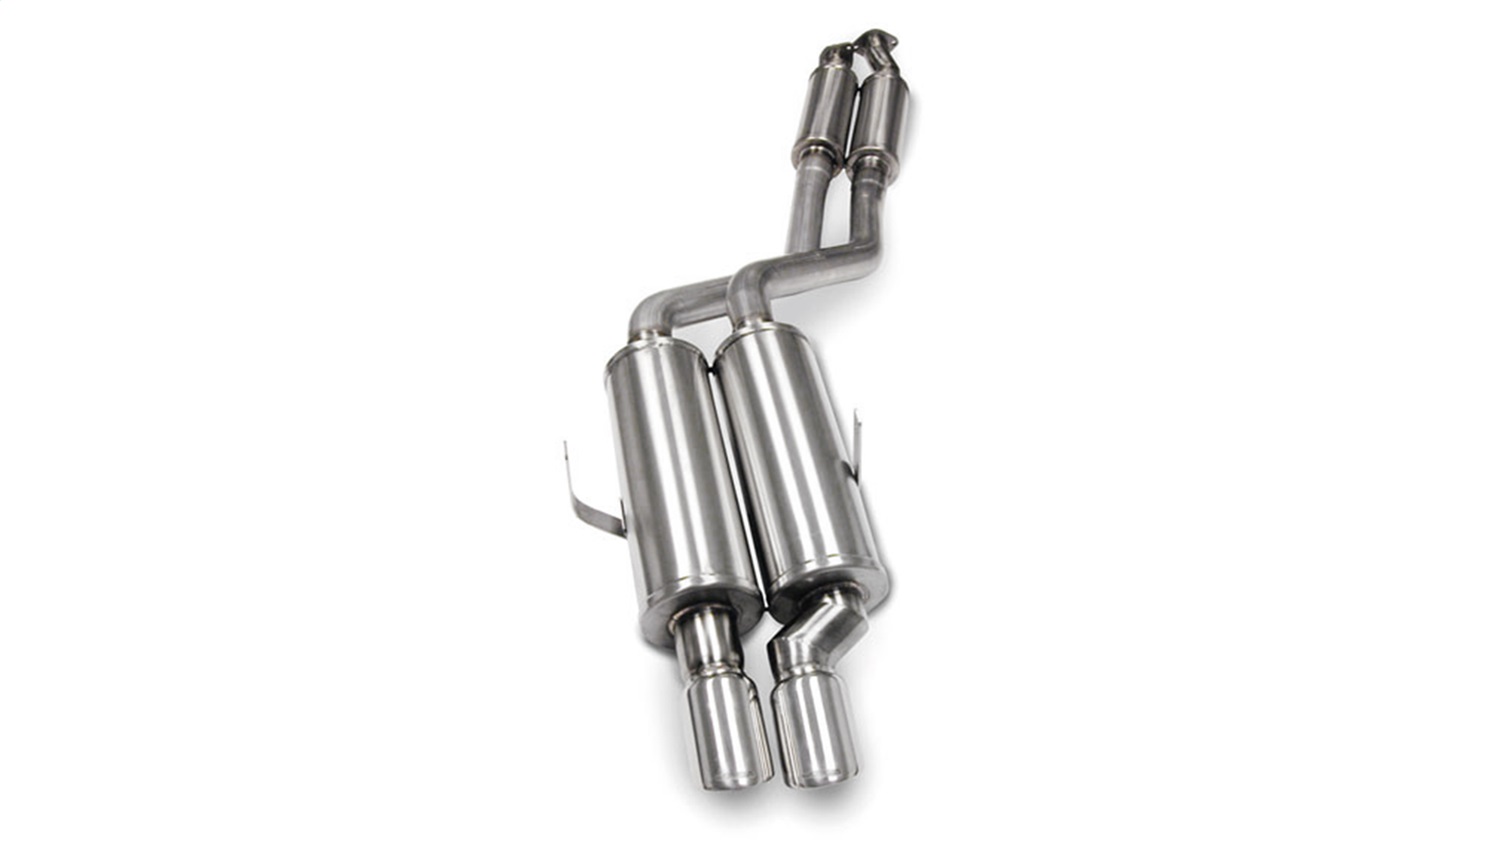 Corsa Performance 14553 Sport Cat-Back Exhaust System Fits 325i 325is 328i 328is